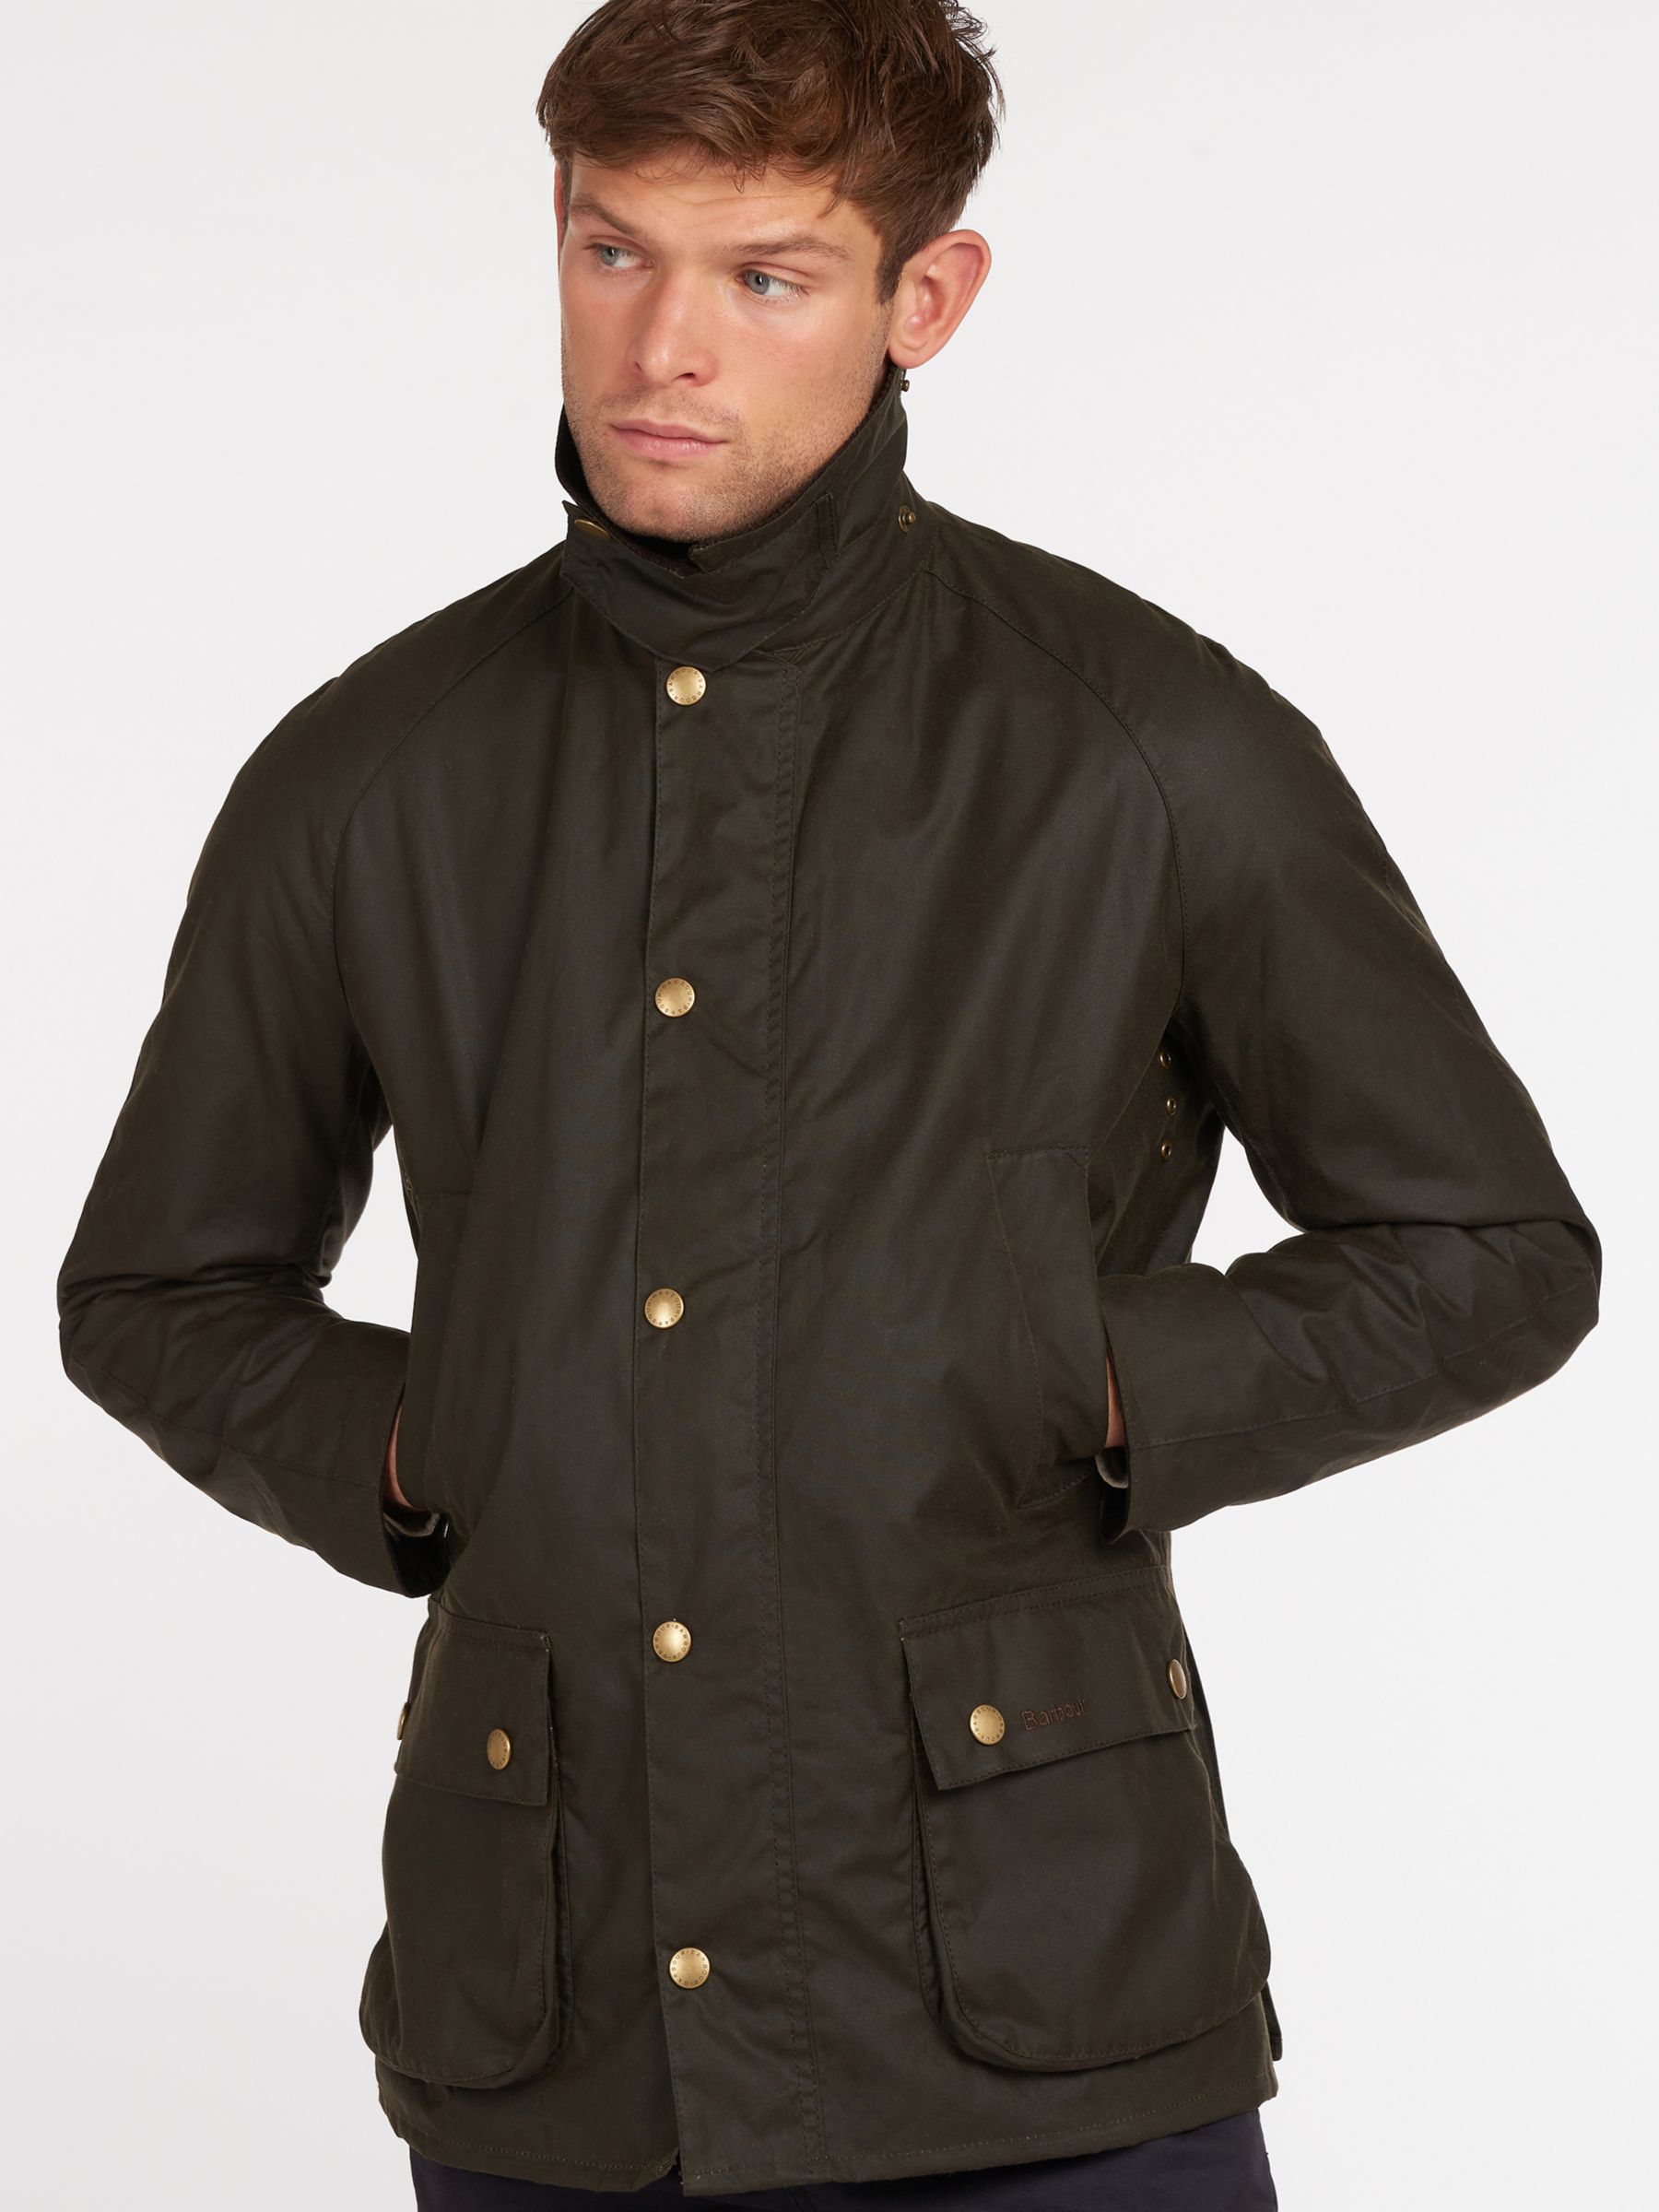 Buy Barbour Lifestyle Ashby Waxed Cotton Field Jacket, Olive | John Lewis